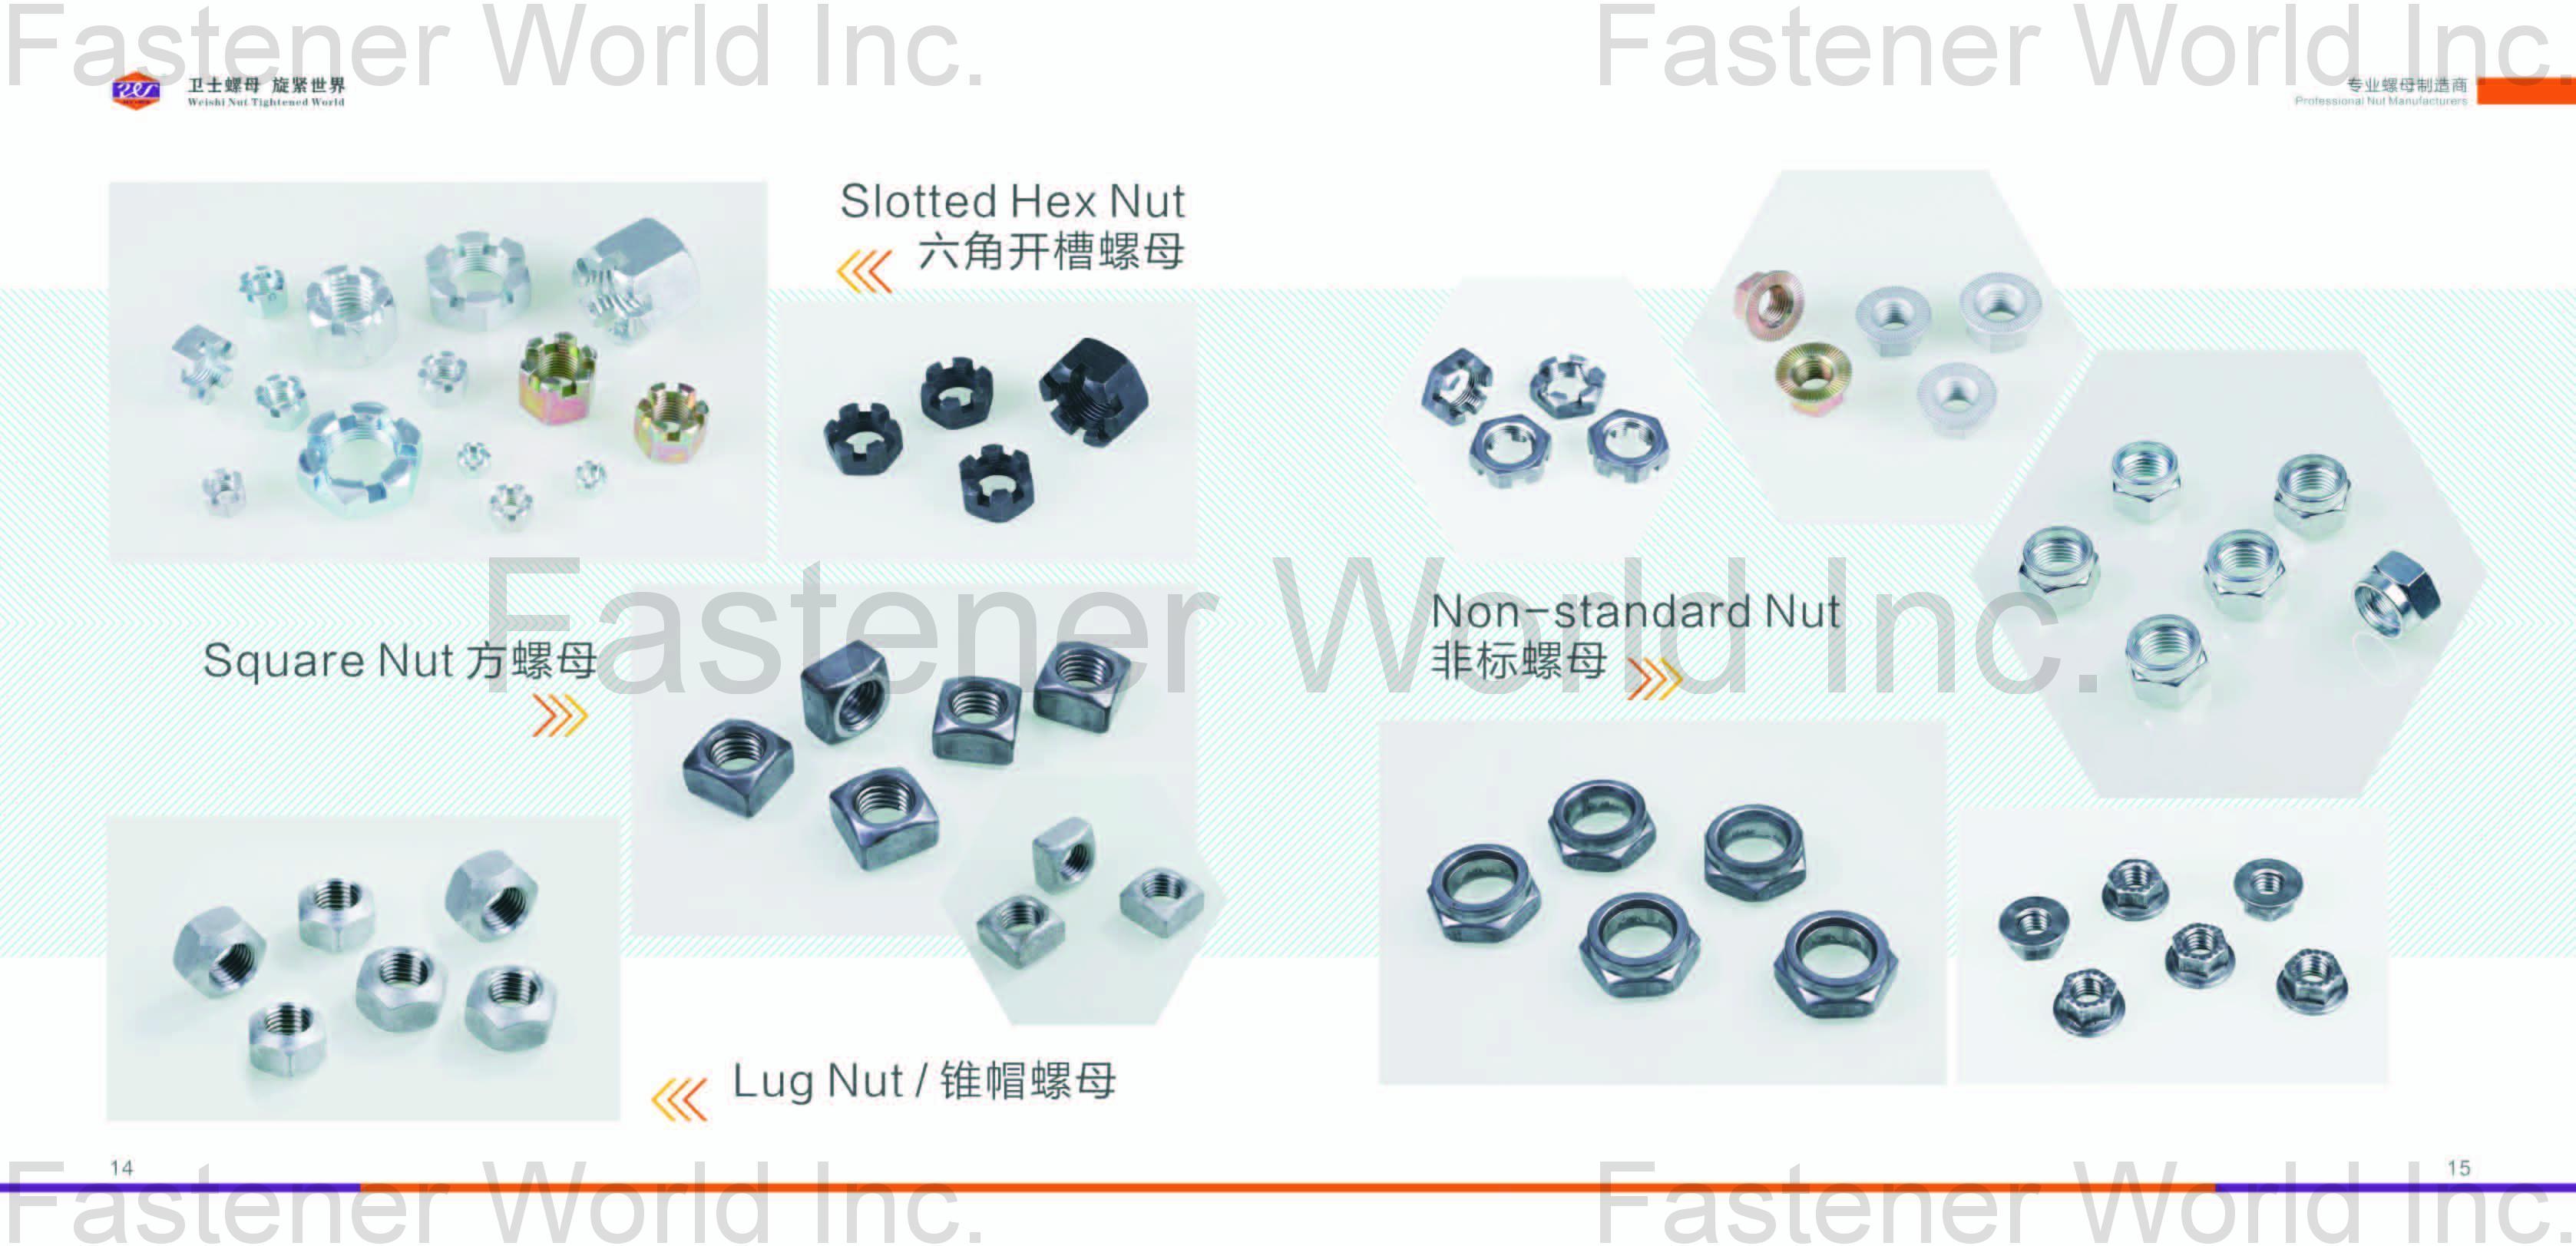 HAIYAN WEISHI FASTENERS CO., LTD. , Slotted Hex Nuts, Square Nuts, Lug Nuts, Non-Standard Nuts